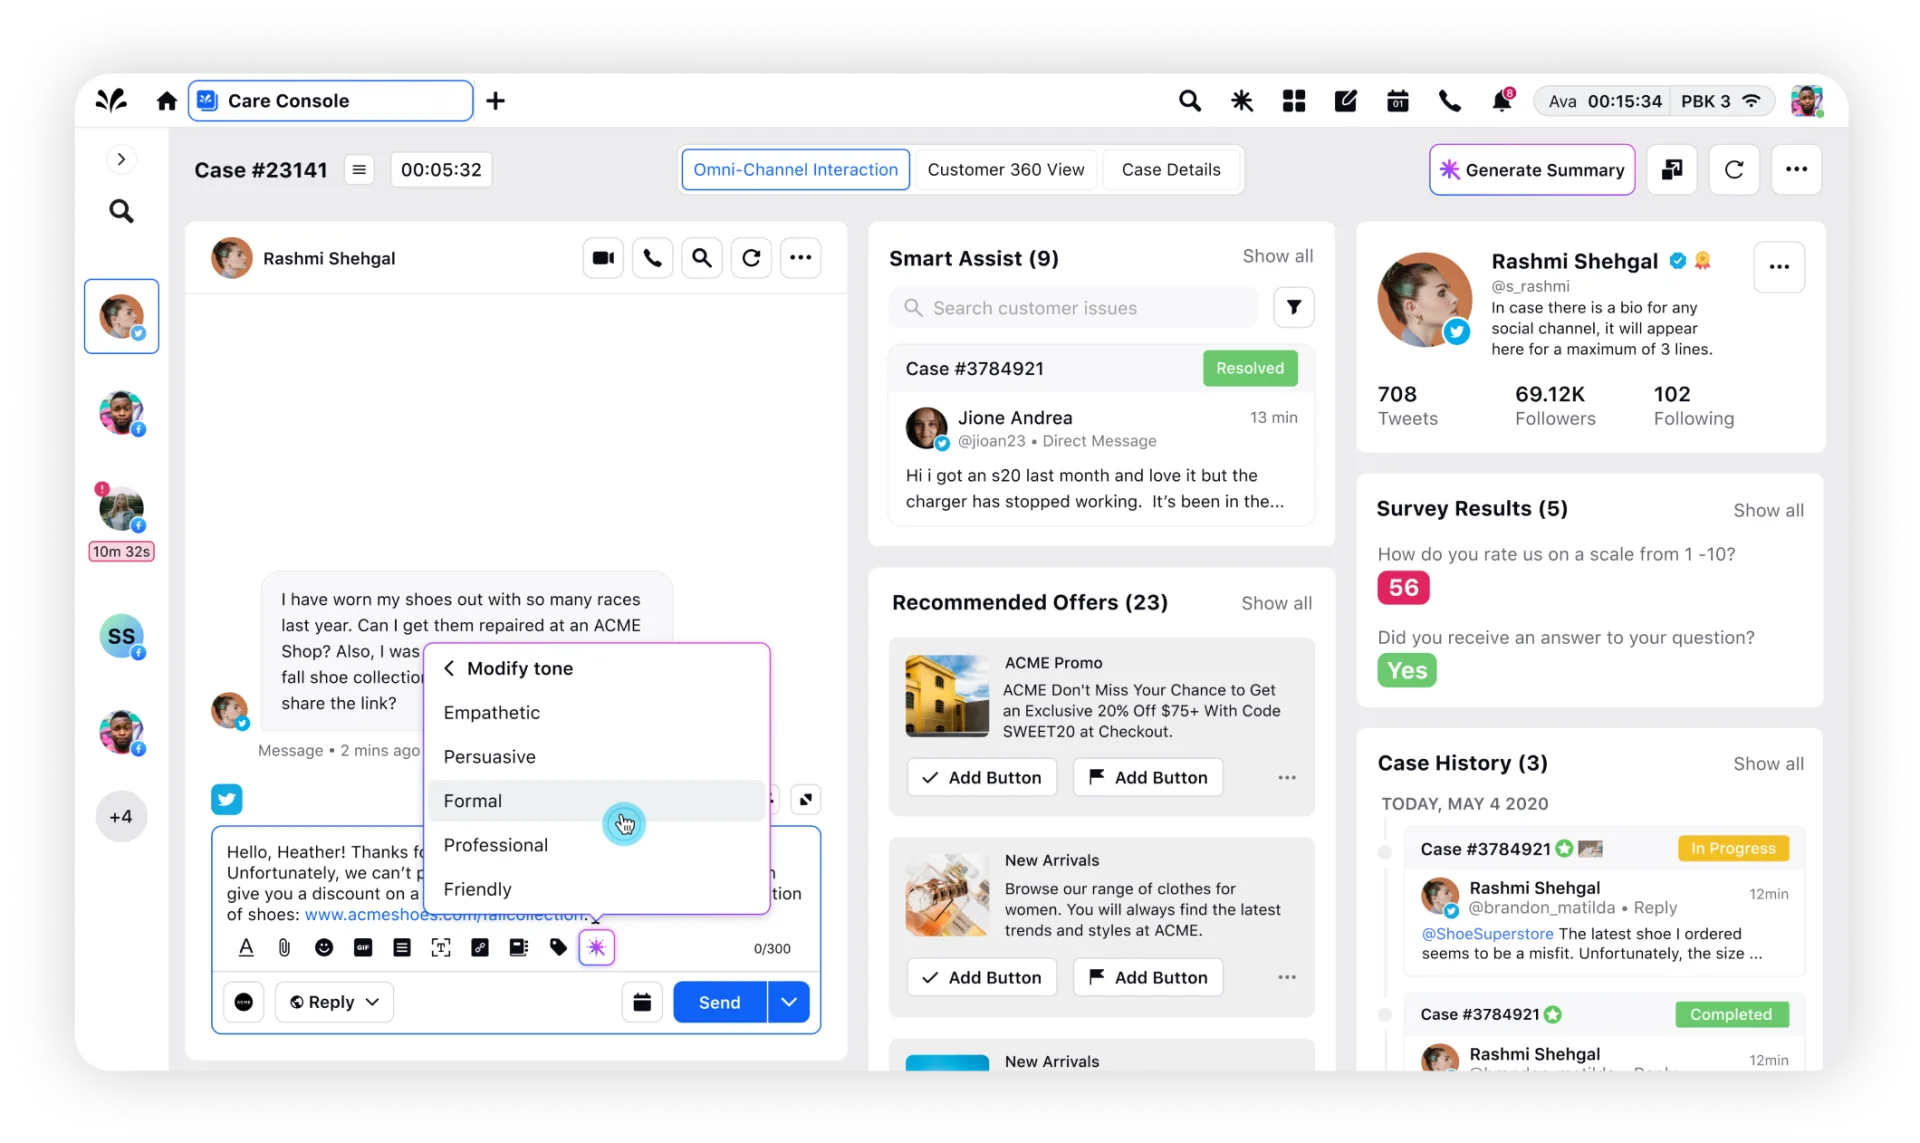 Tone moderation in customer support conversations with Sprinklr AI+